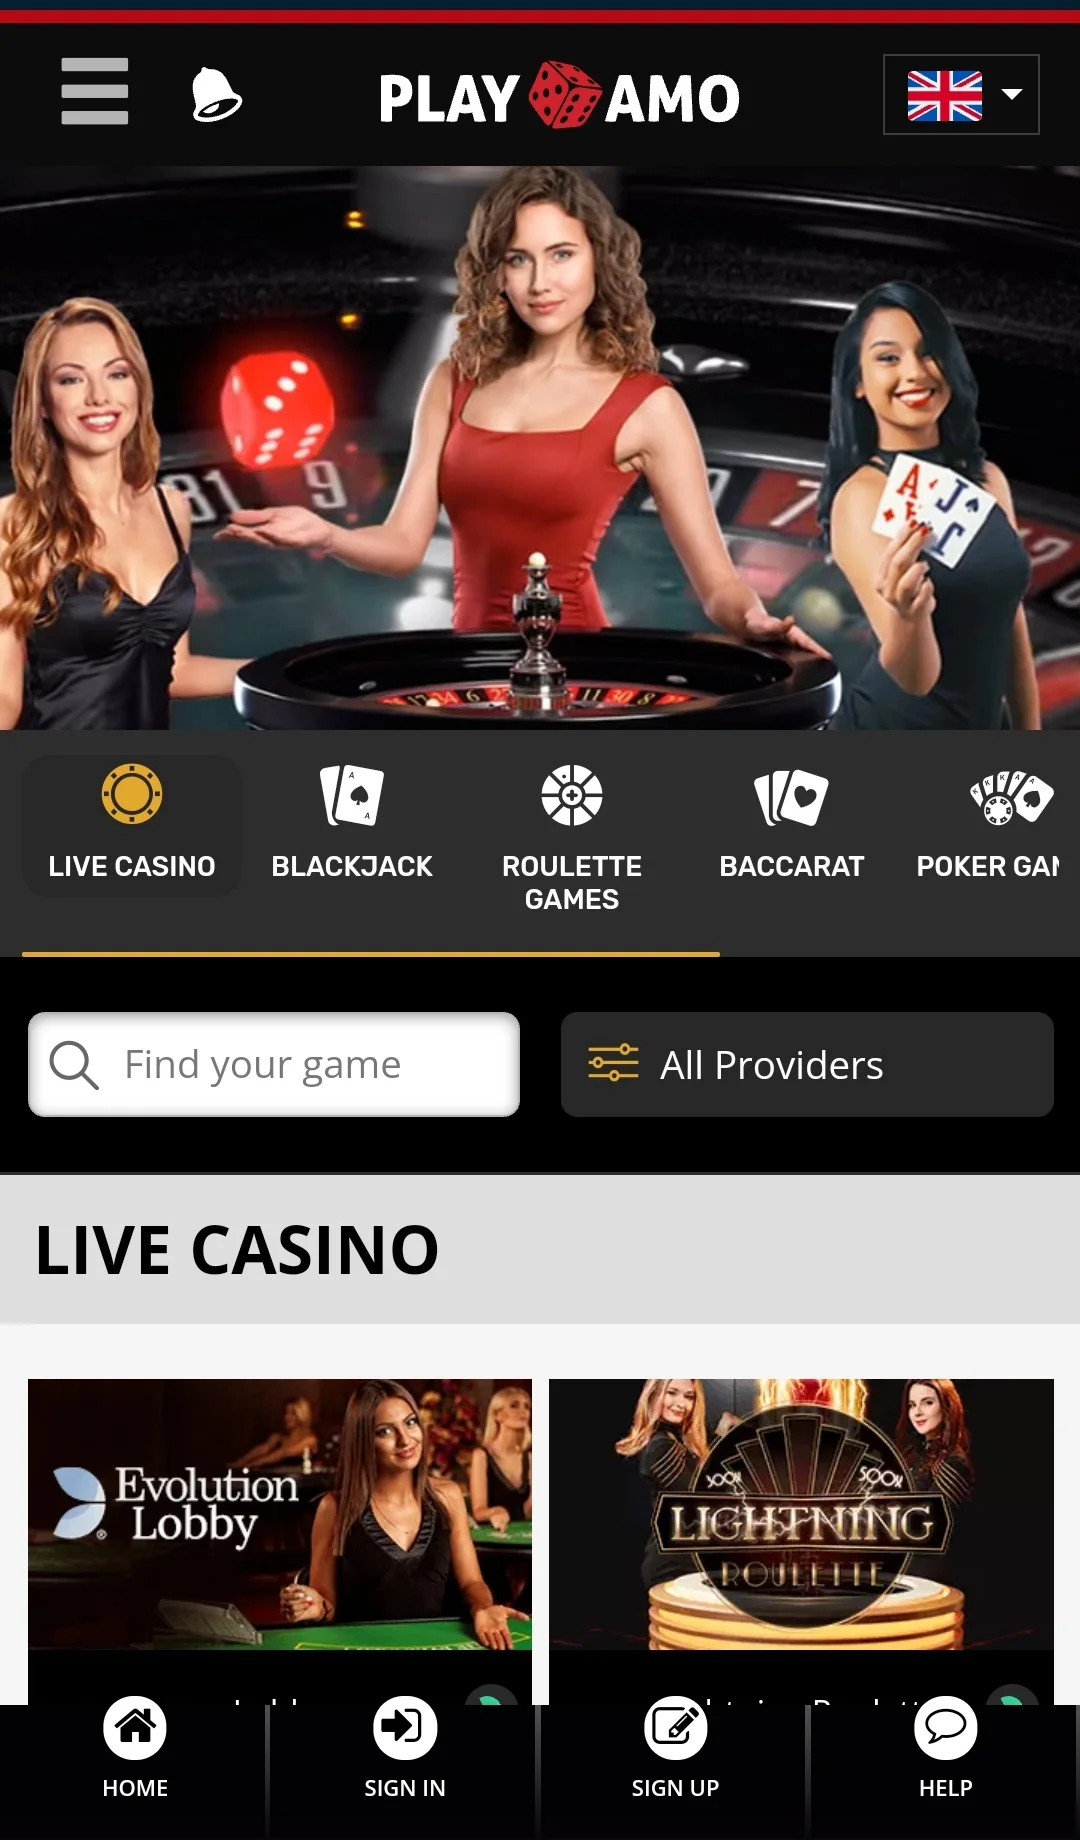 Playamo Casino Review 2022 - An Unbiased Look at This Online Casino